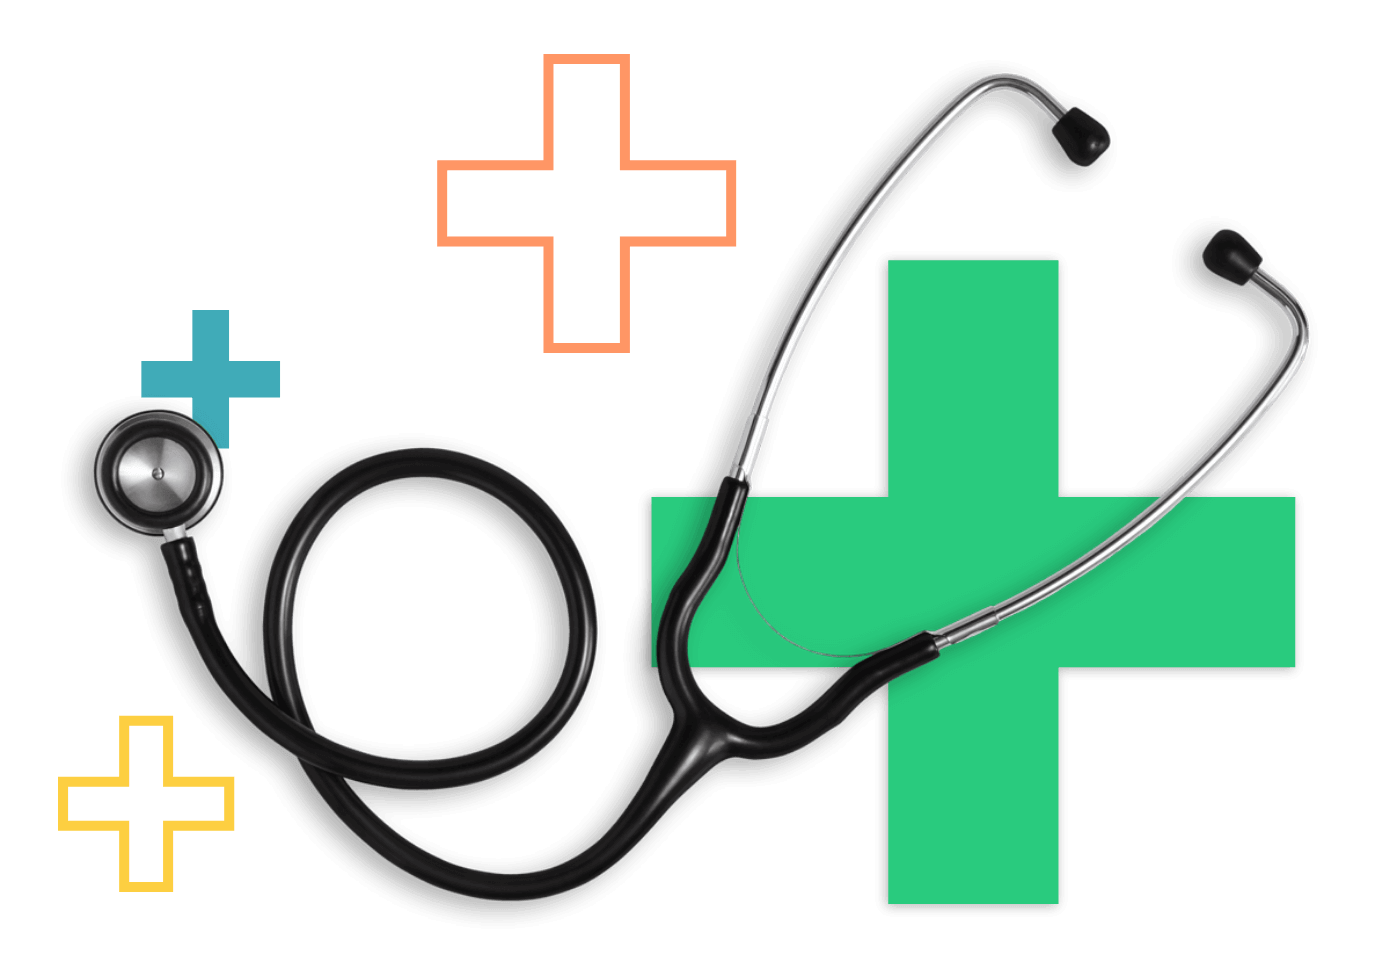 stethoscope overlaid over colorful cross icons